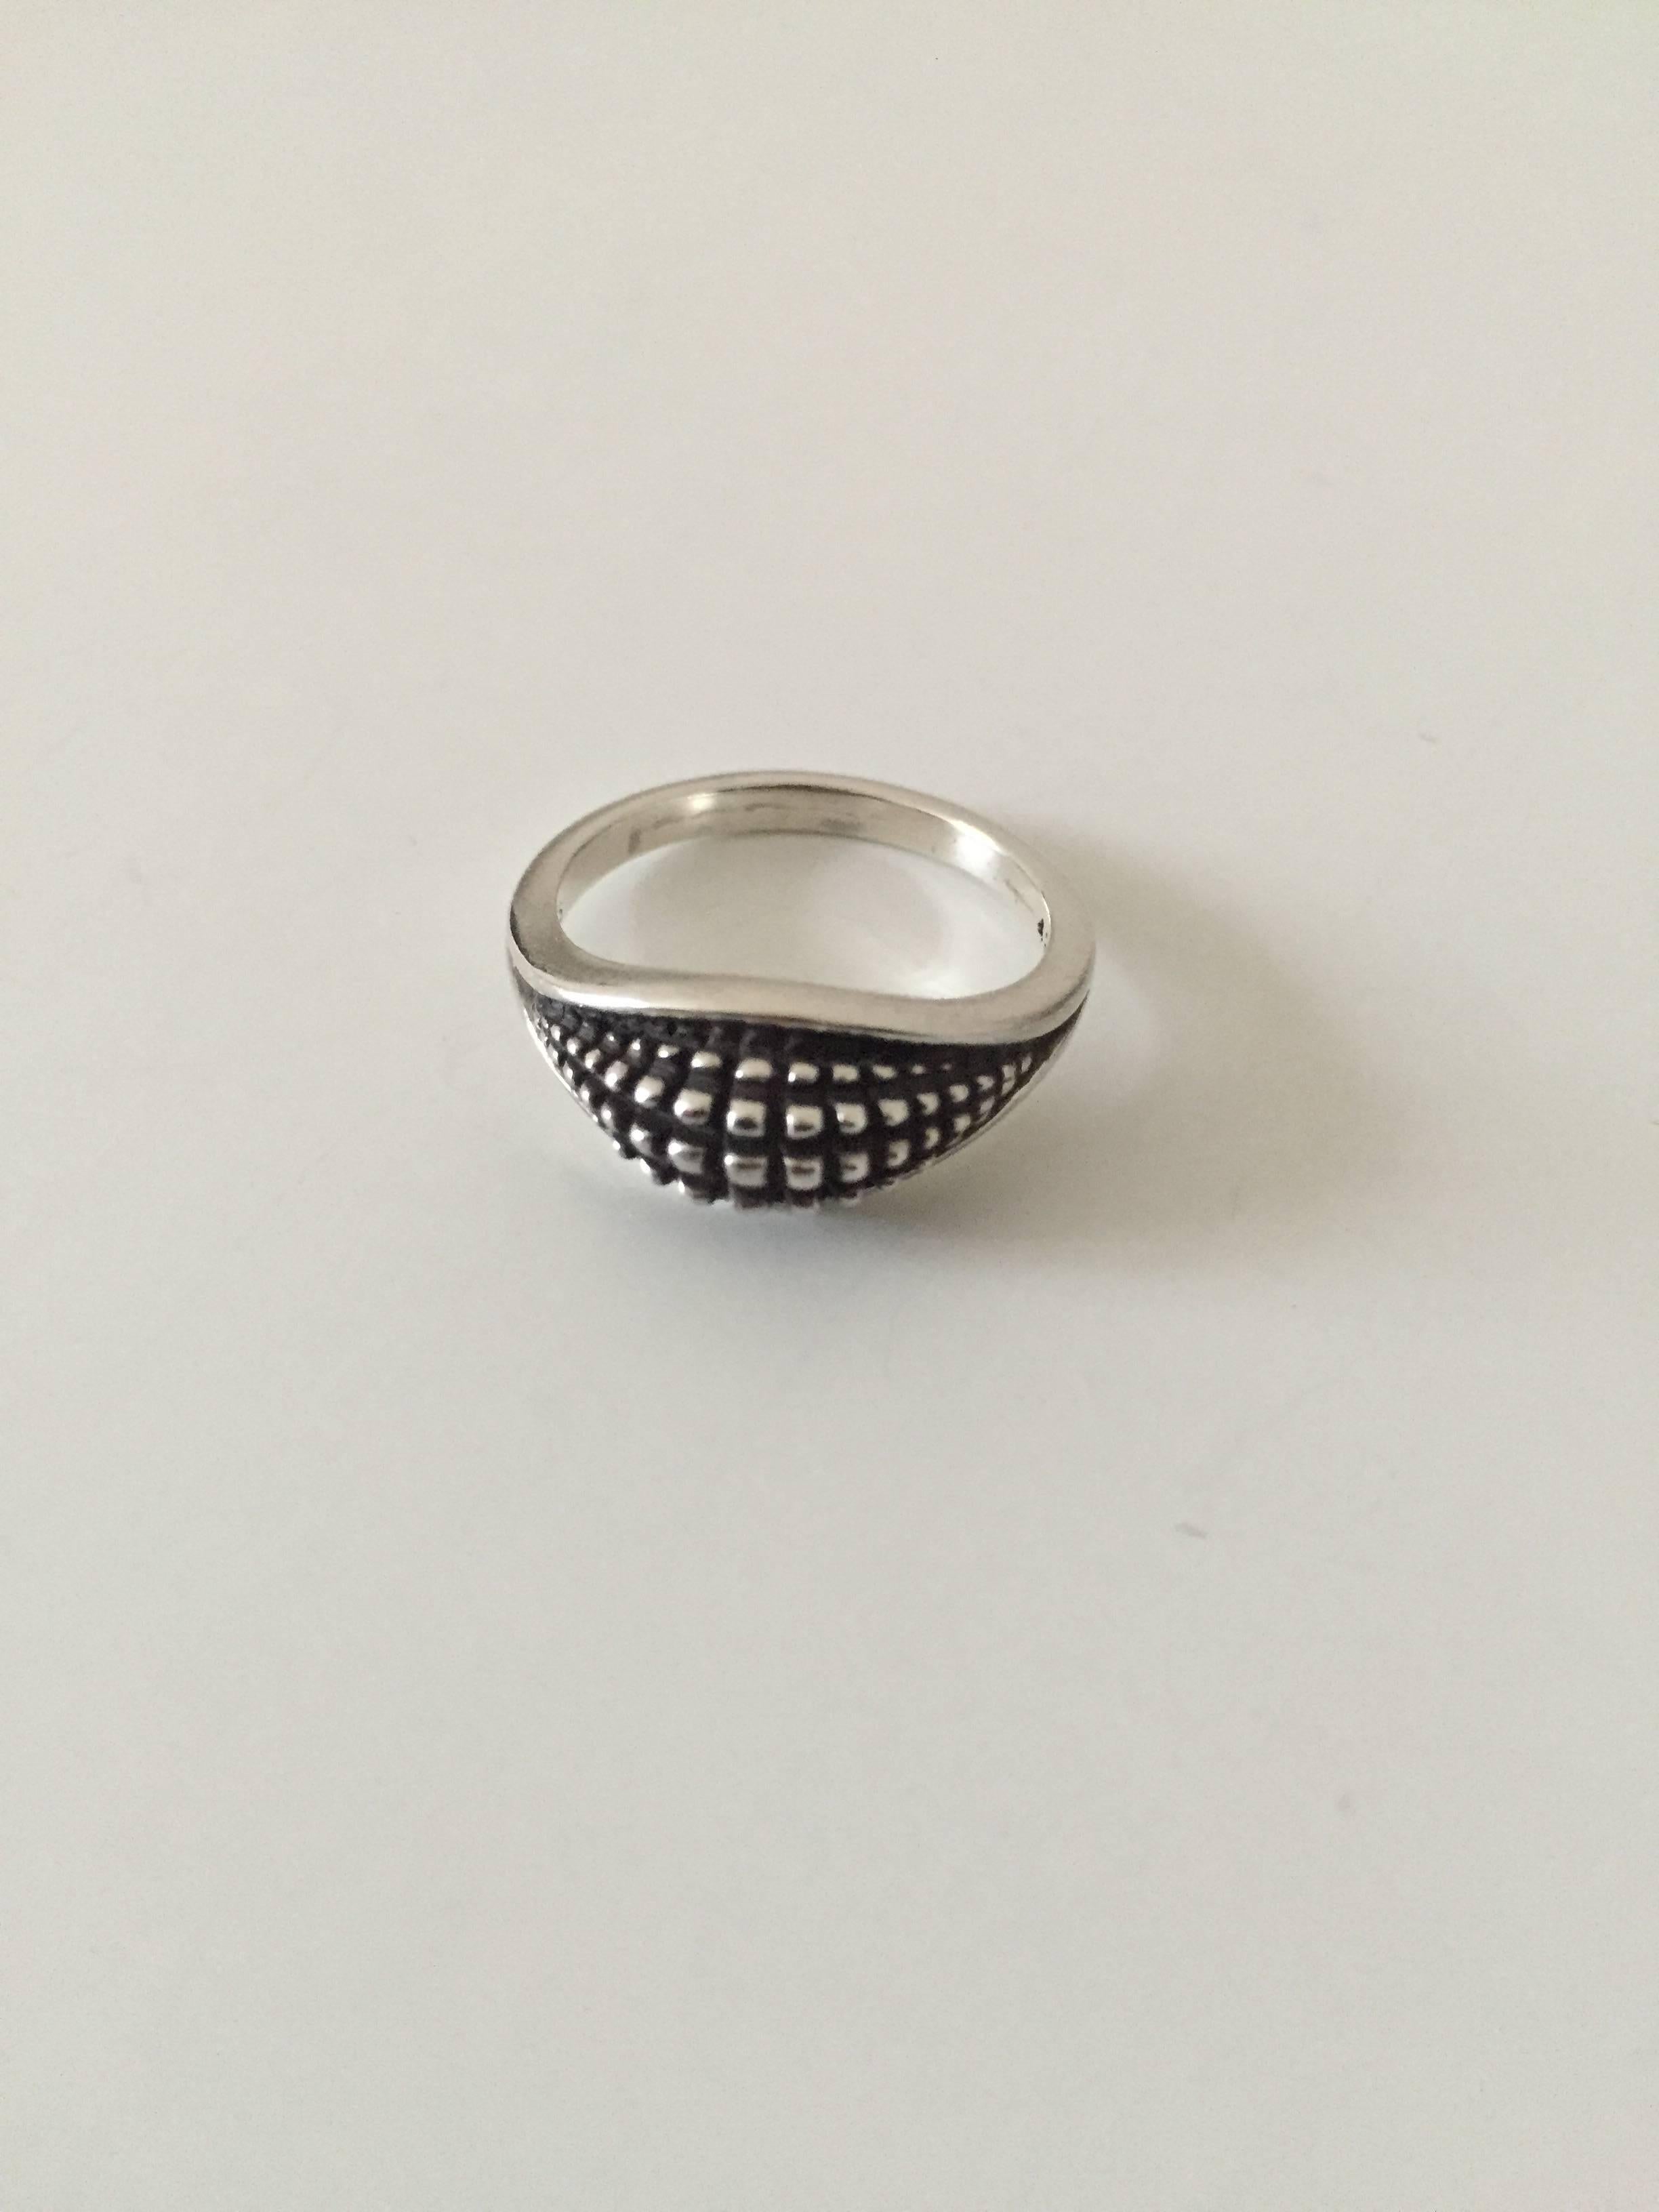 Georg Jensen sterling silver ring #425. 

Size 59. 
Weighs 5 g / 0.20 oz.

Georg Jensen (1866-1935) opened his small silver atelier in Copenhagen, Denmark in 1904. By 1935 the year of his death, he had received world acclaim and was hailed in